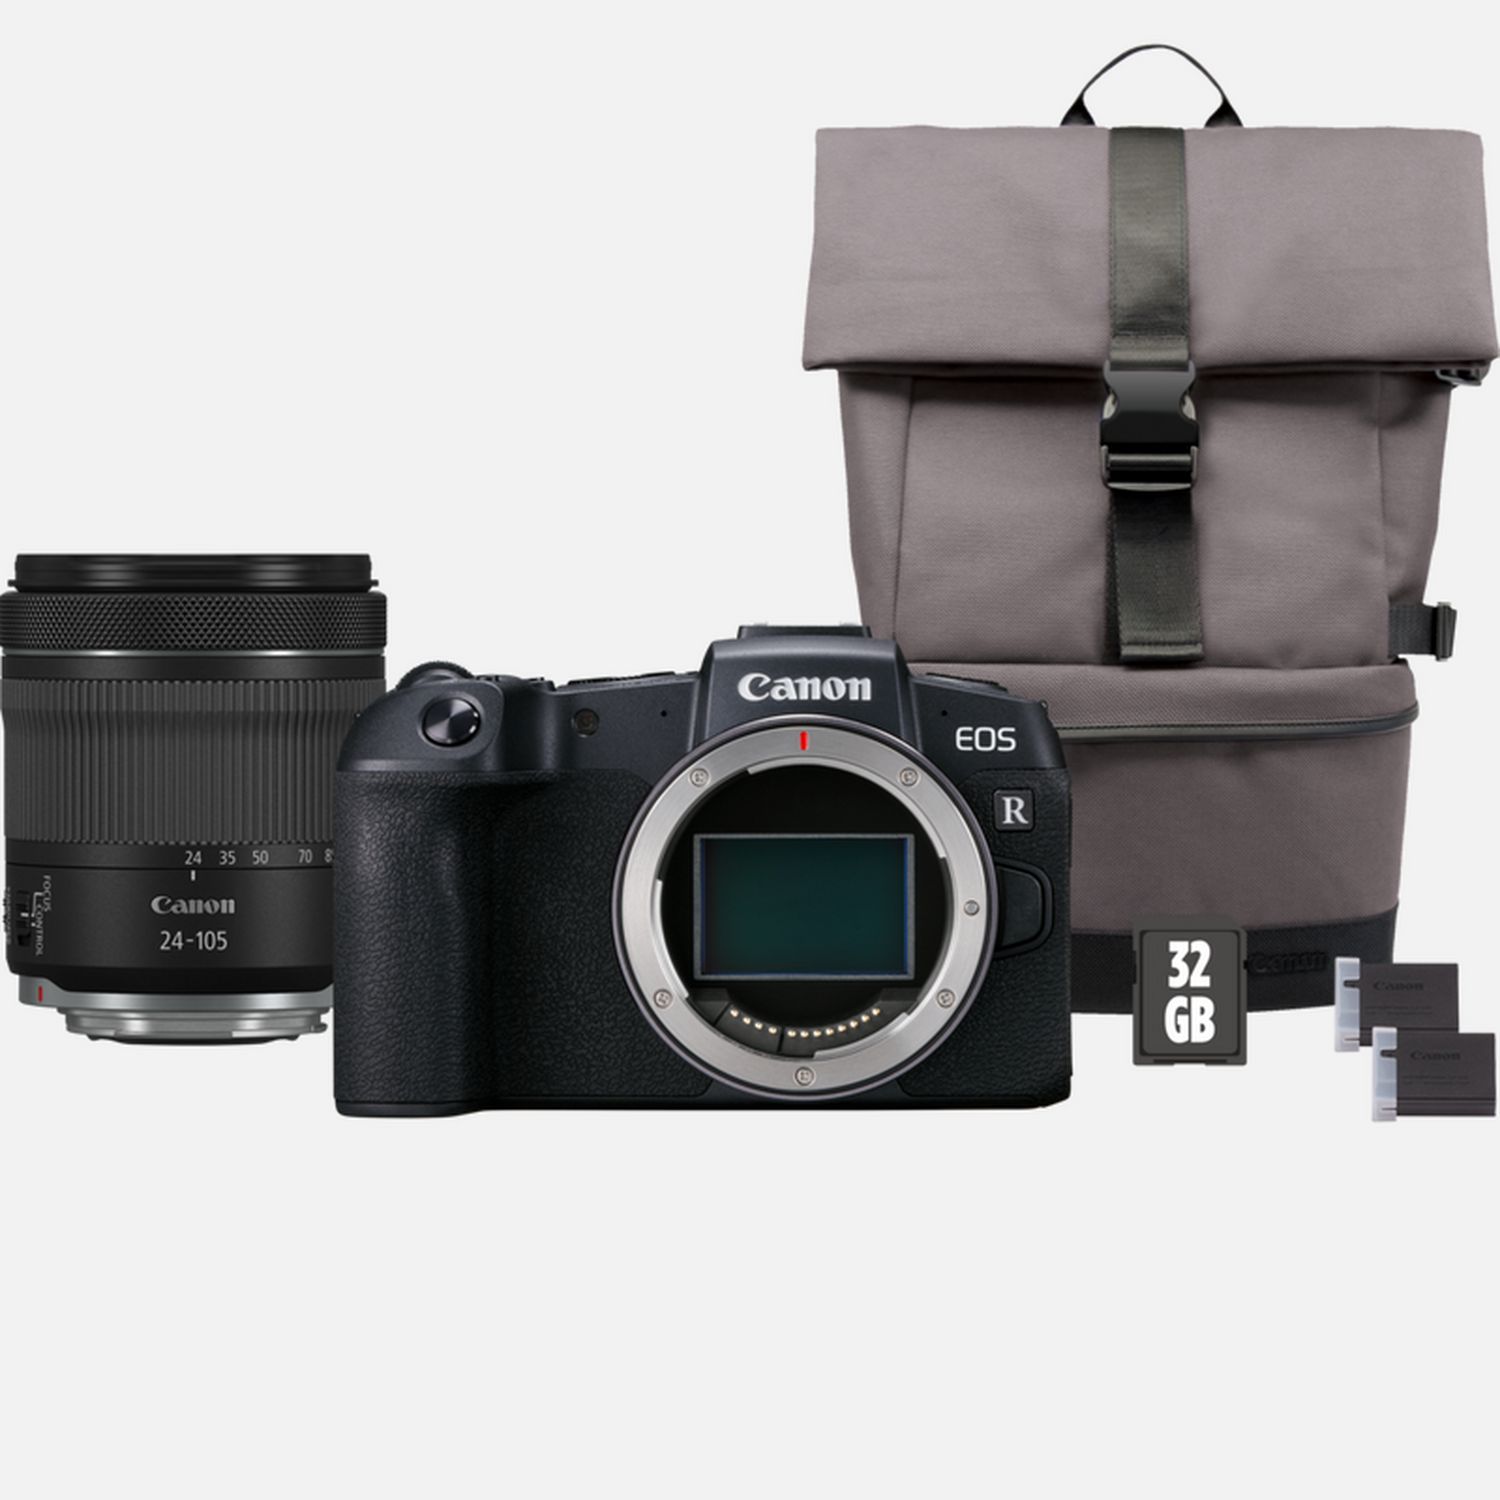 Canon + + Canon Spare UAE in EOS Store Buy Cameras Backpack card RF RP Lens Battery STM Body + — IS 24-105mm + Wi-Fi SD